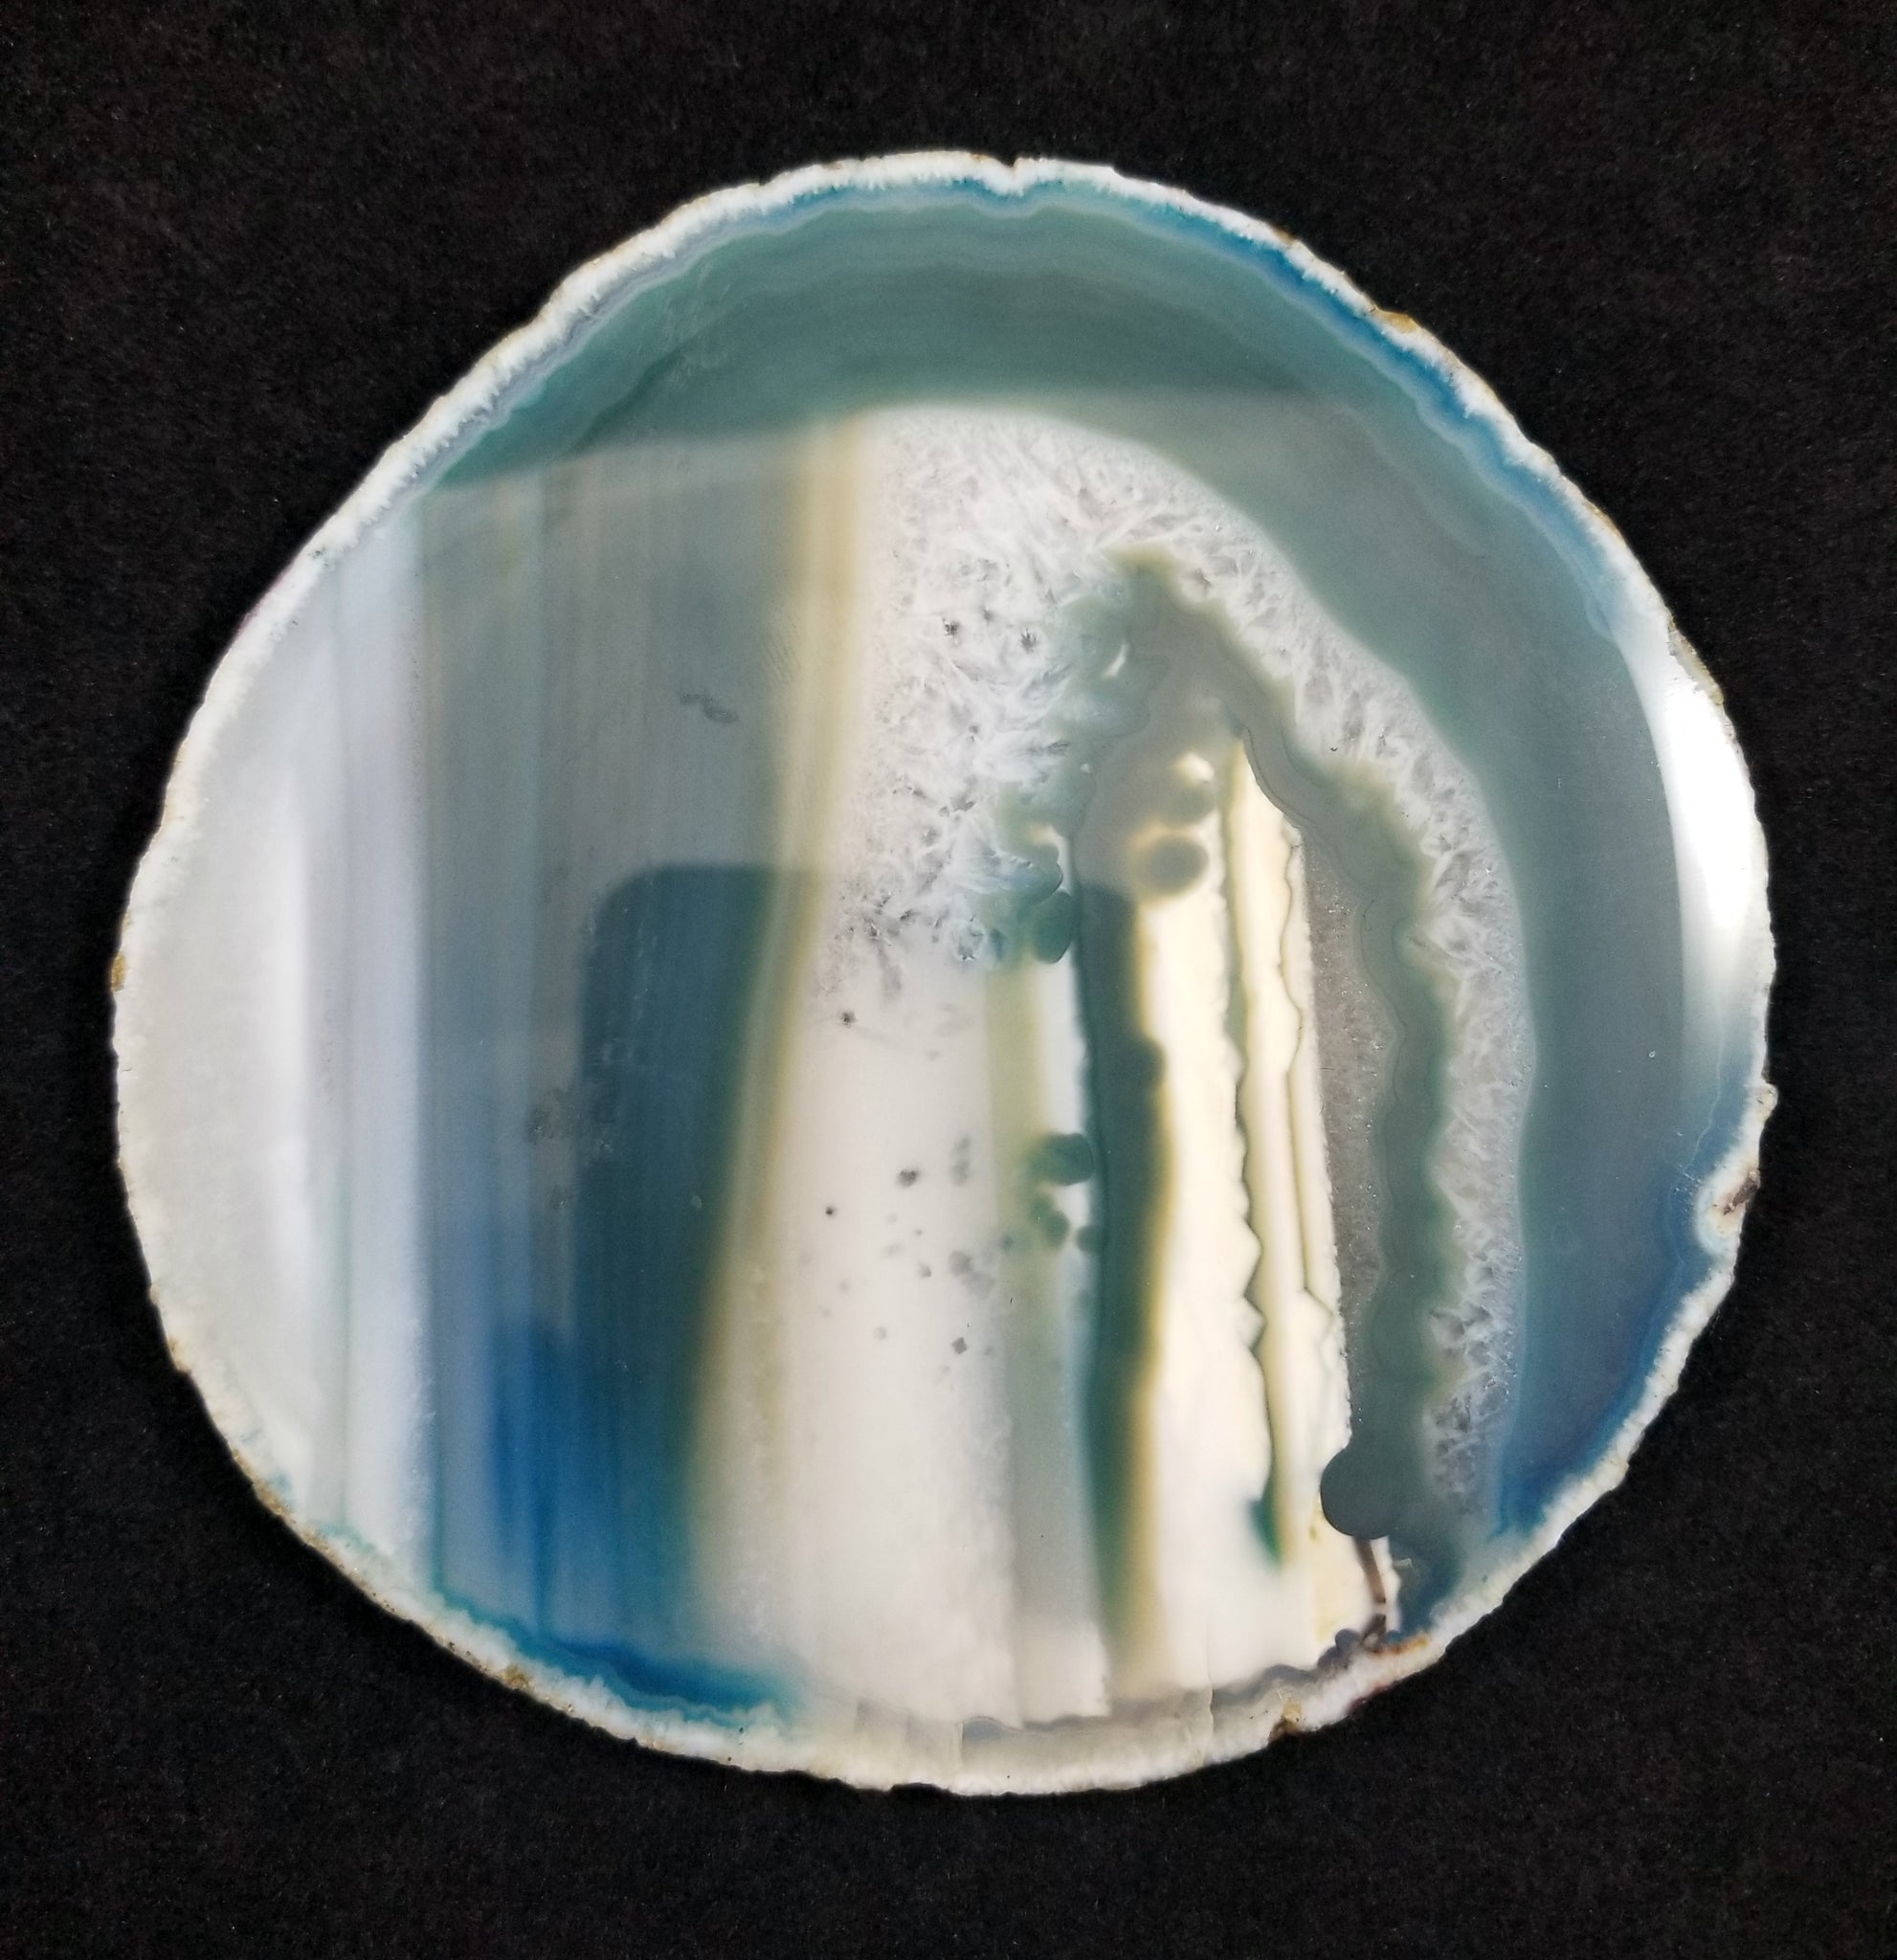 Dyed Agate